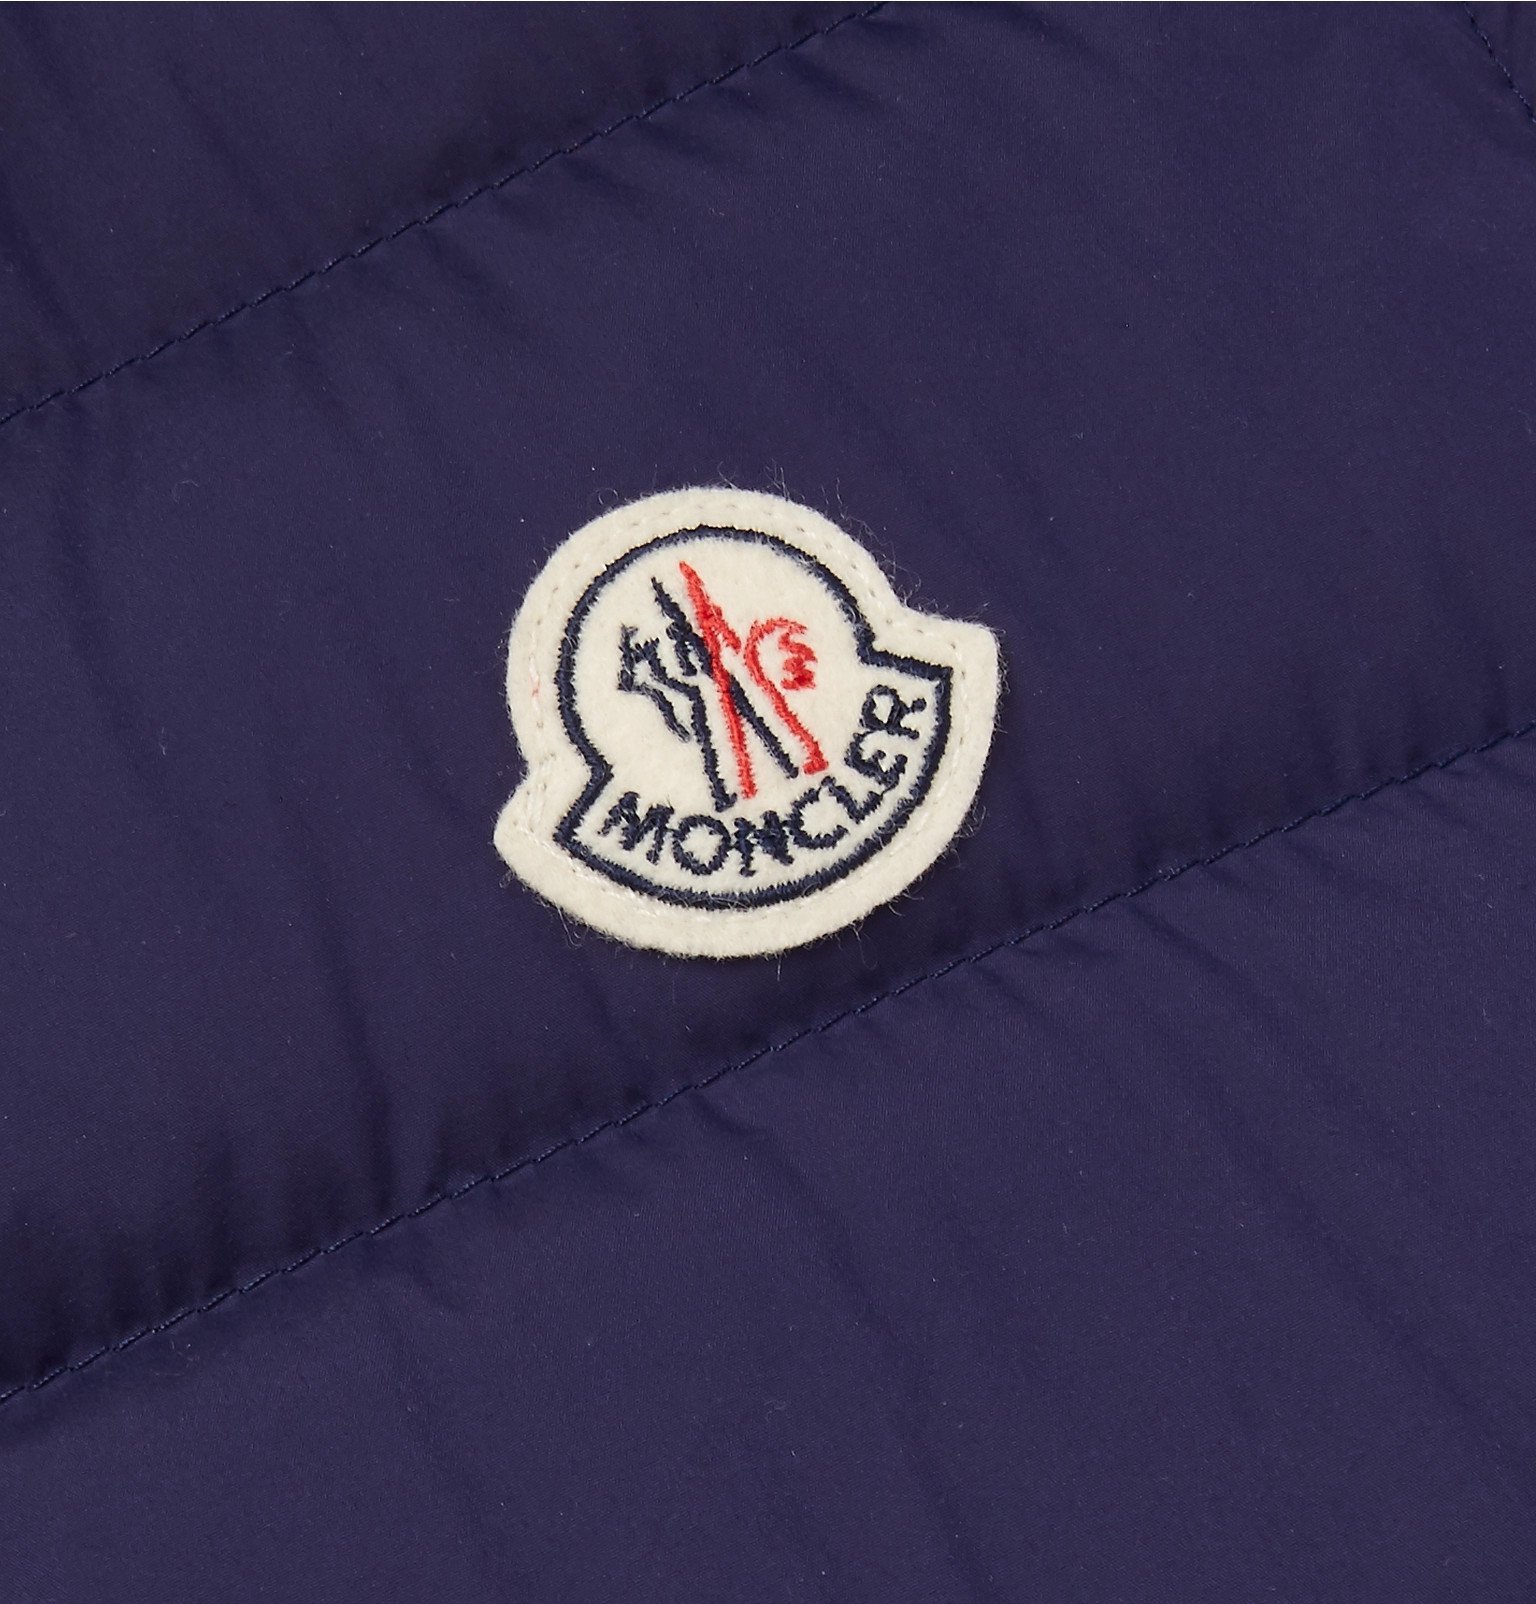 Moncler - Febe Slim-Fit Quilted Shell Down Gilet - Blue Moncler